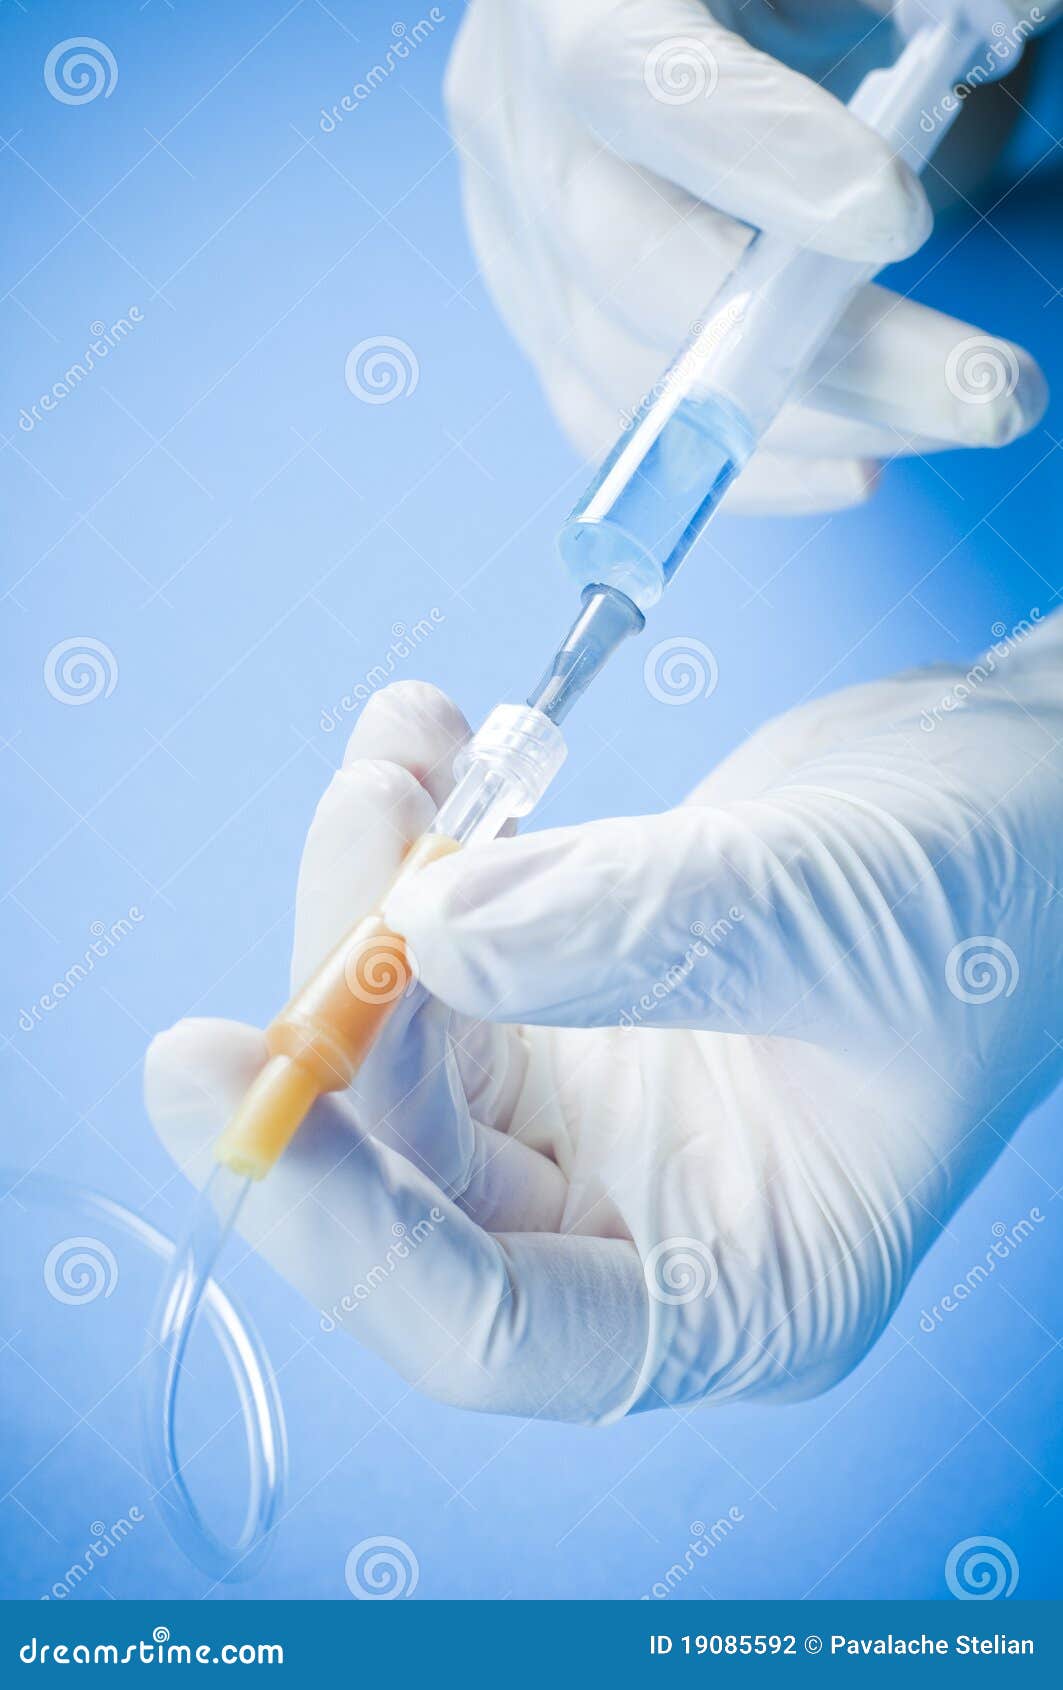 doctor with catheter and syringe